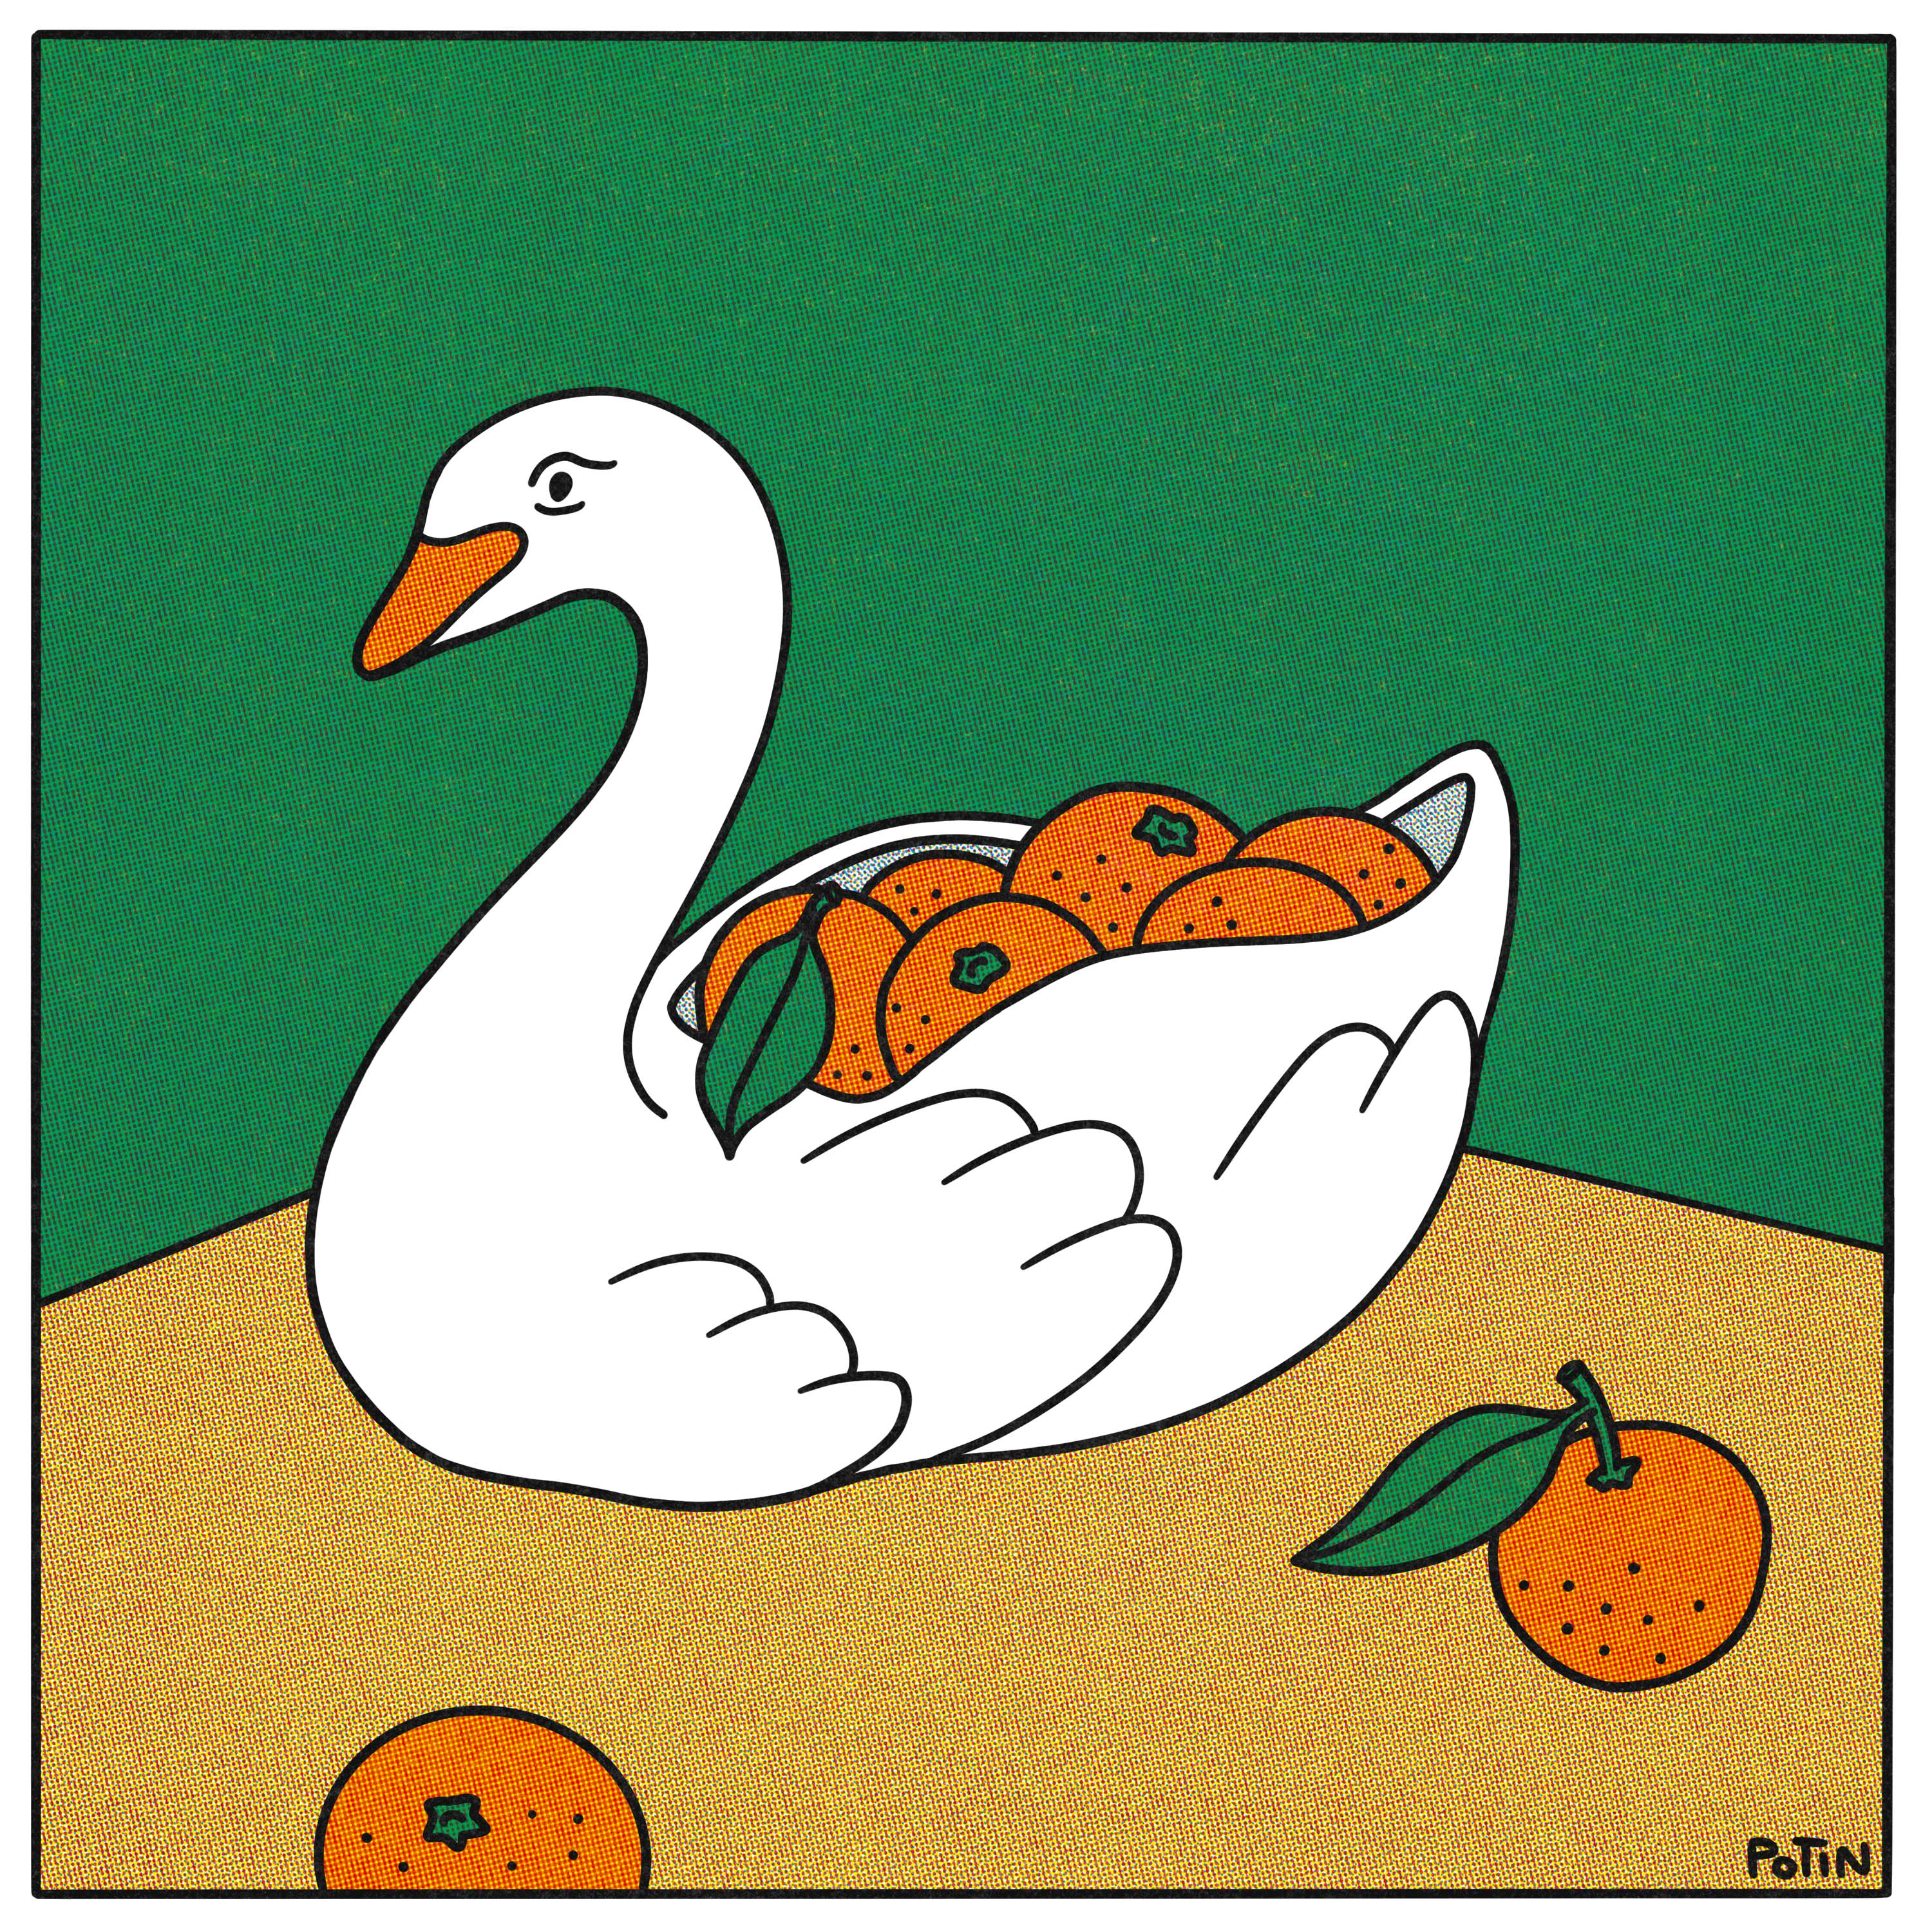 Swan-shaped planter filled with oranges limited edition art print